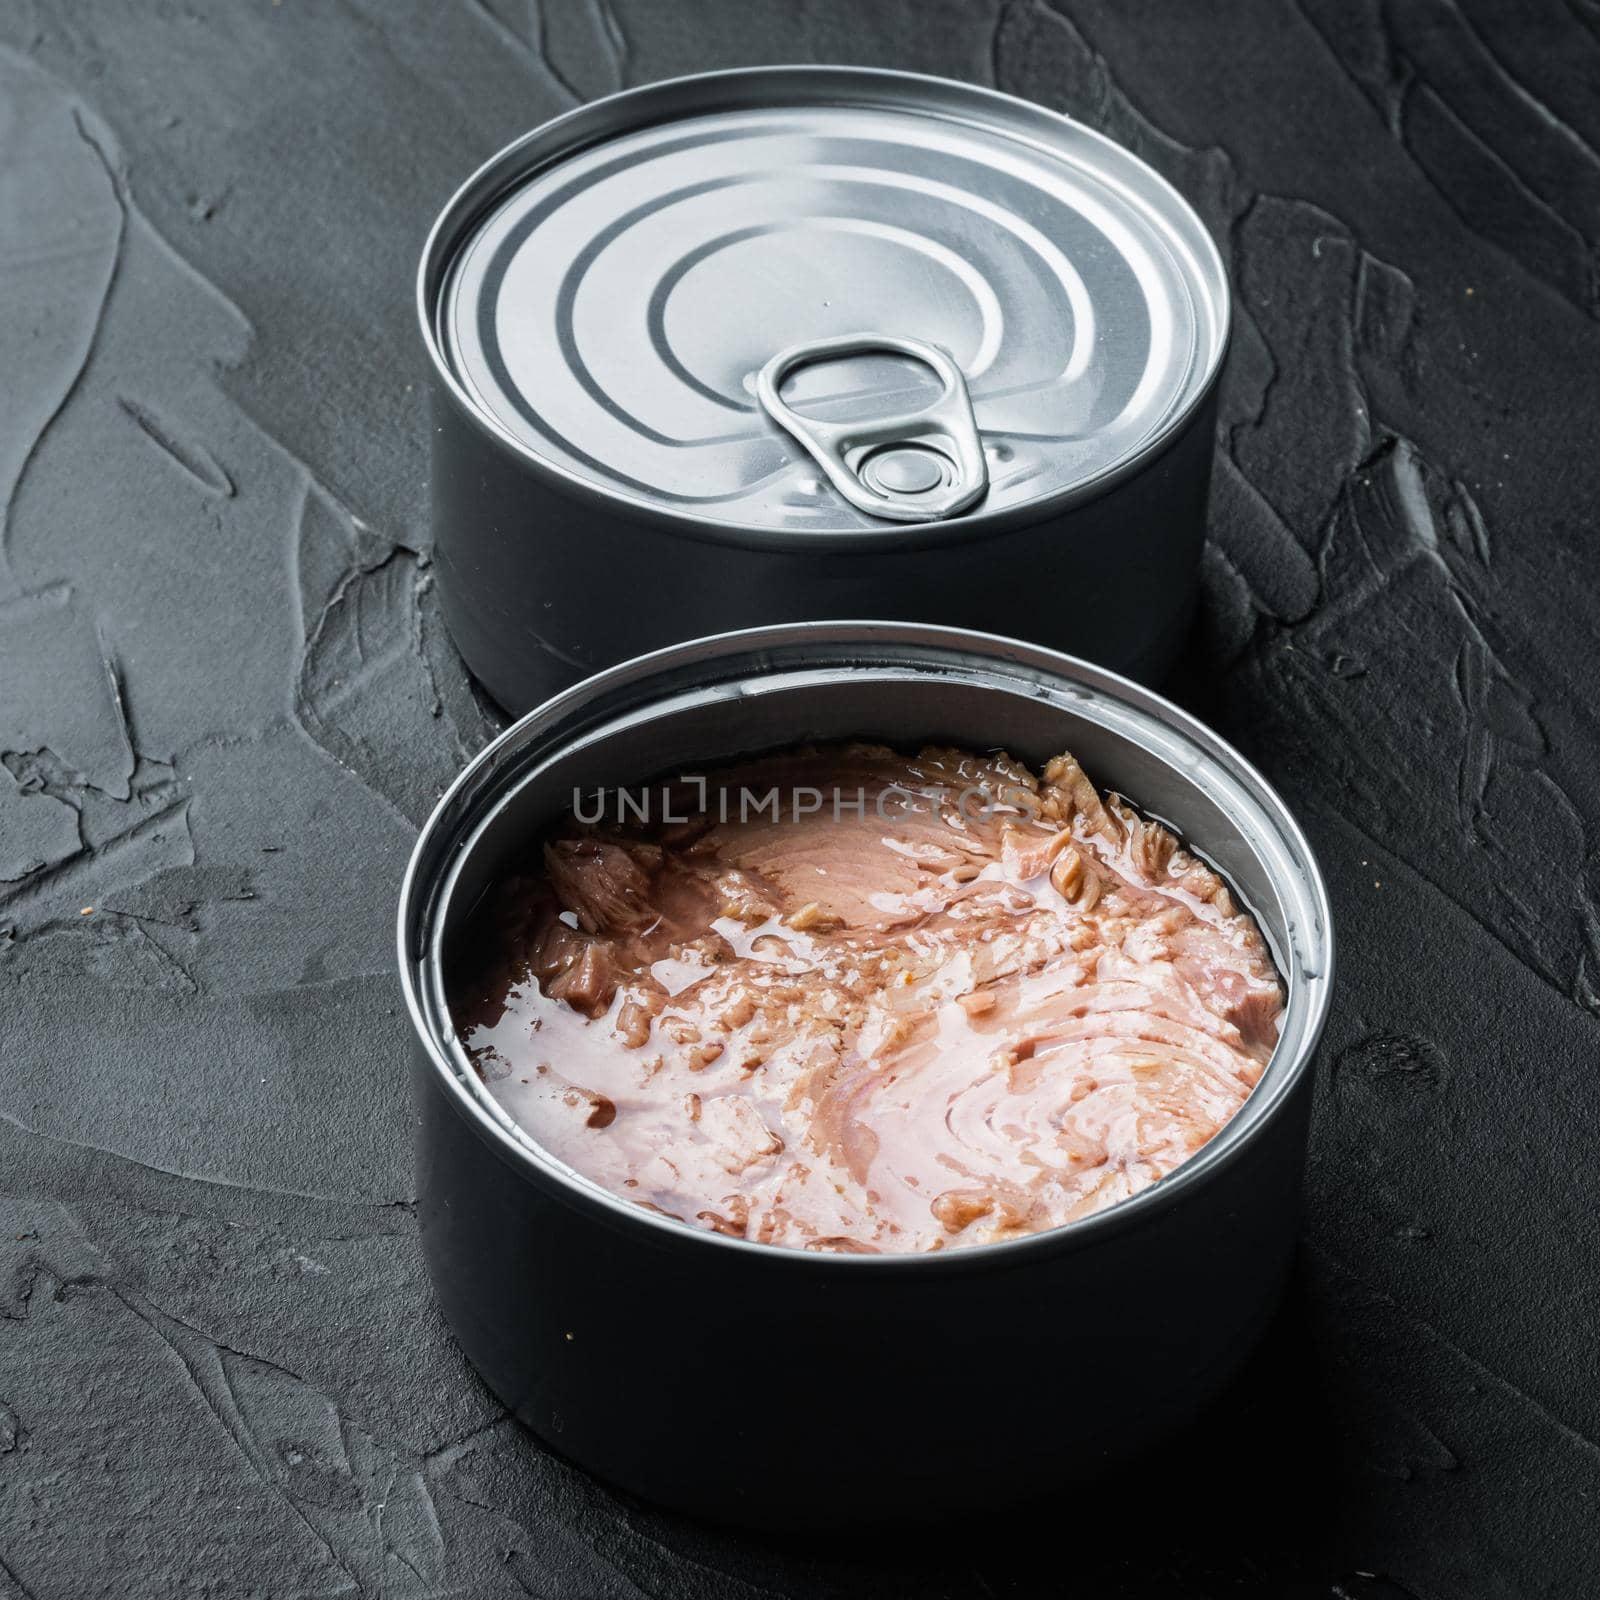 Canned Chunk Light Tuna, in tin can, on black background by Ilianesolenyi